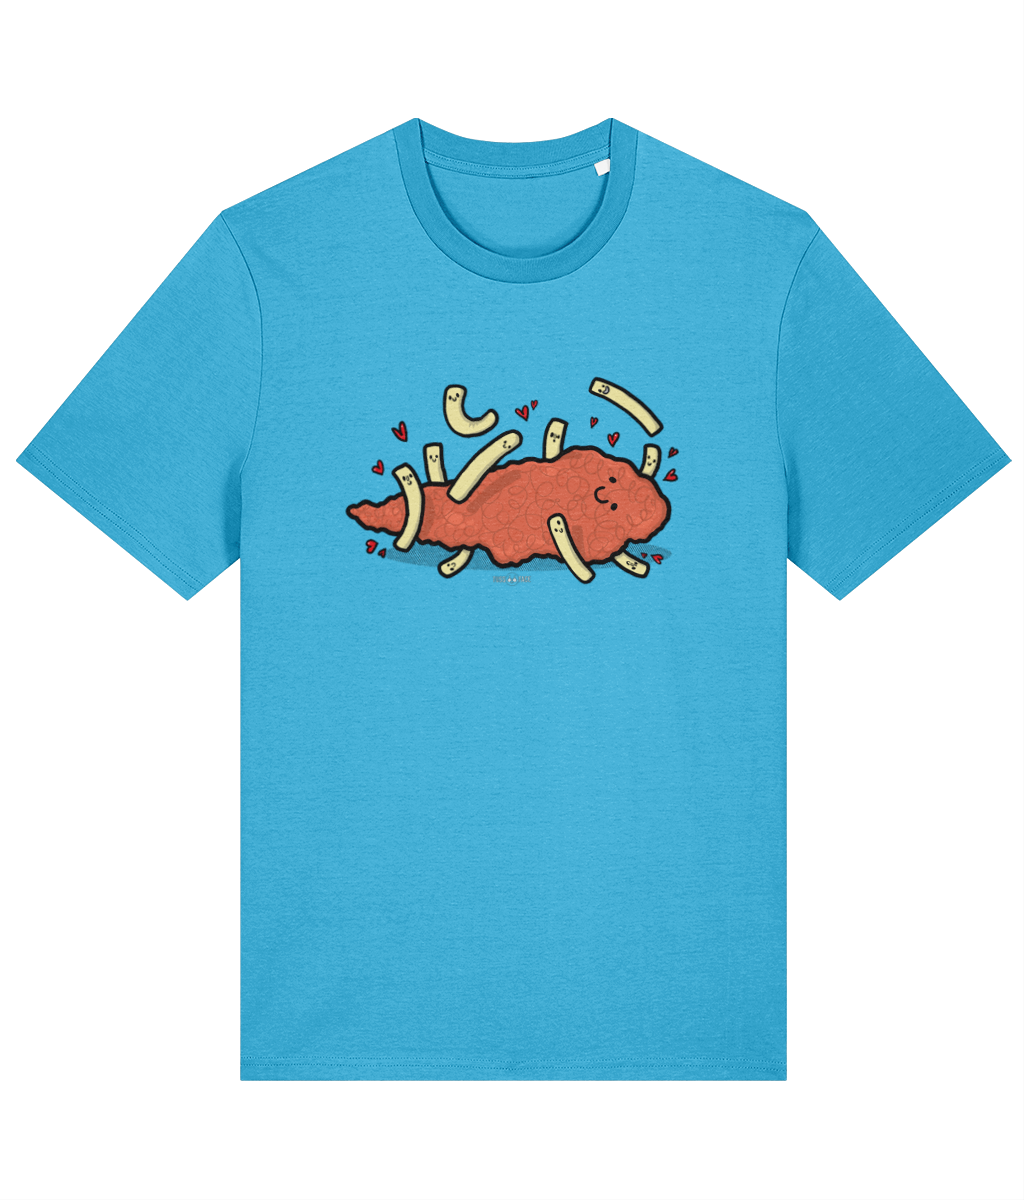 Fish Loves Chips - Tussface T-shirt